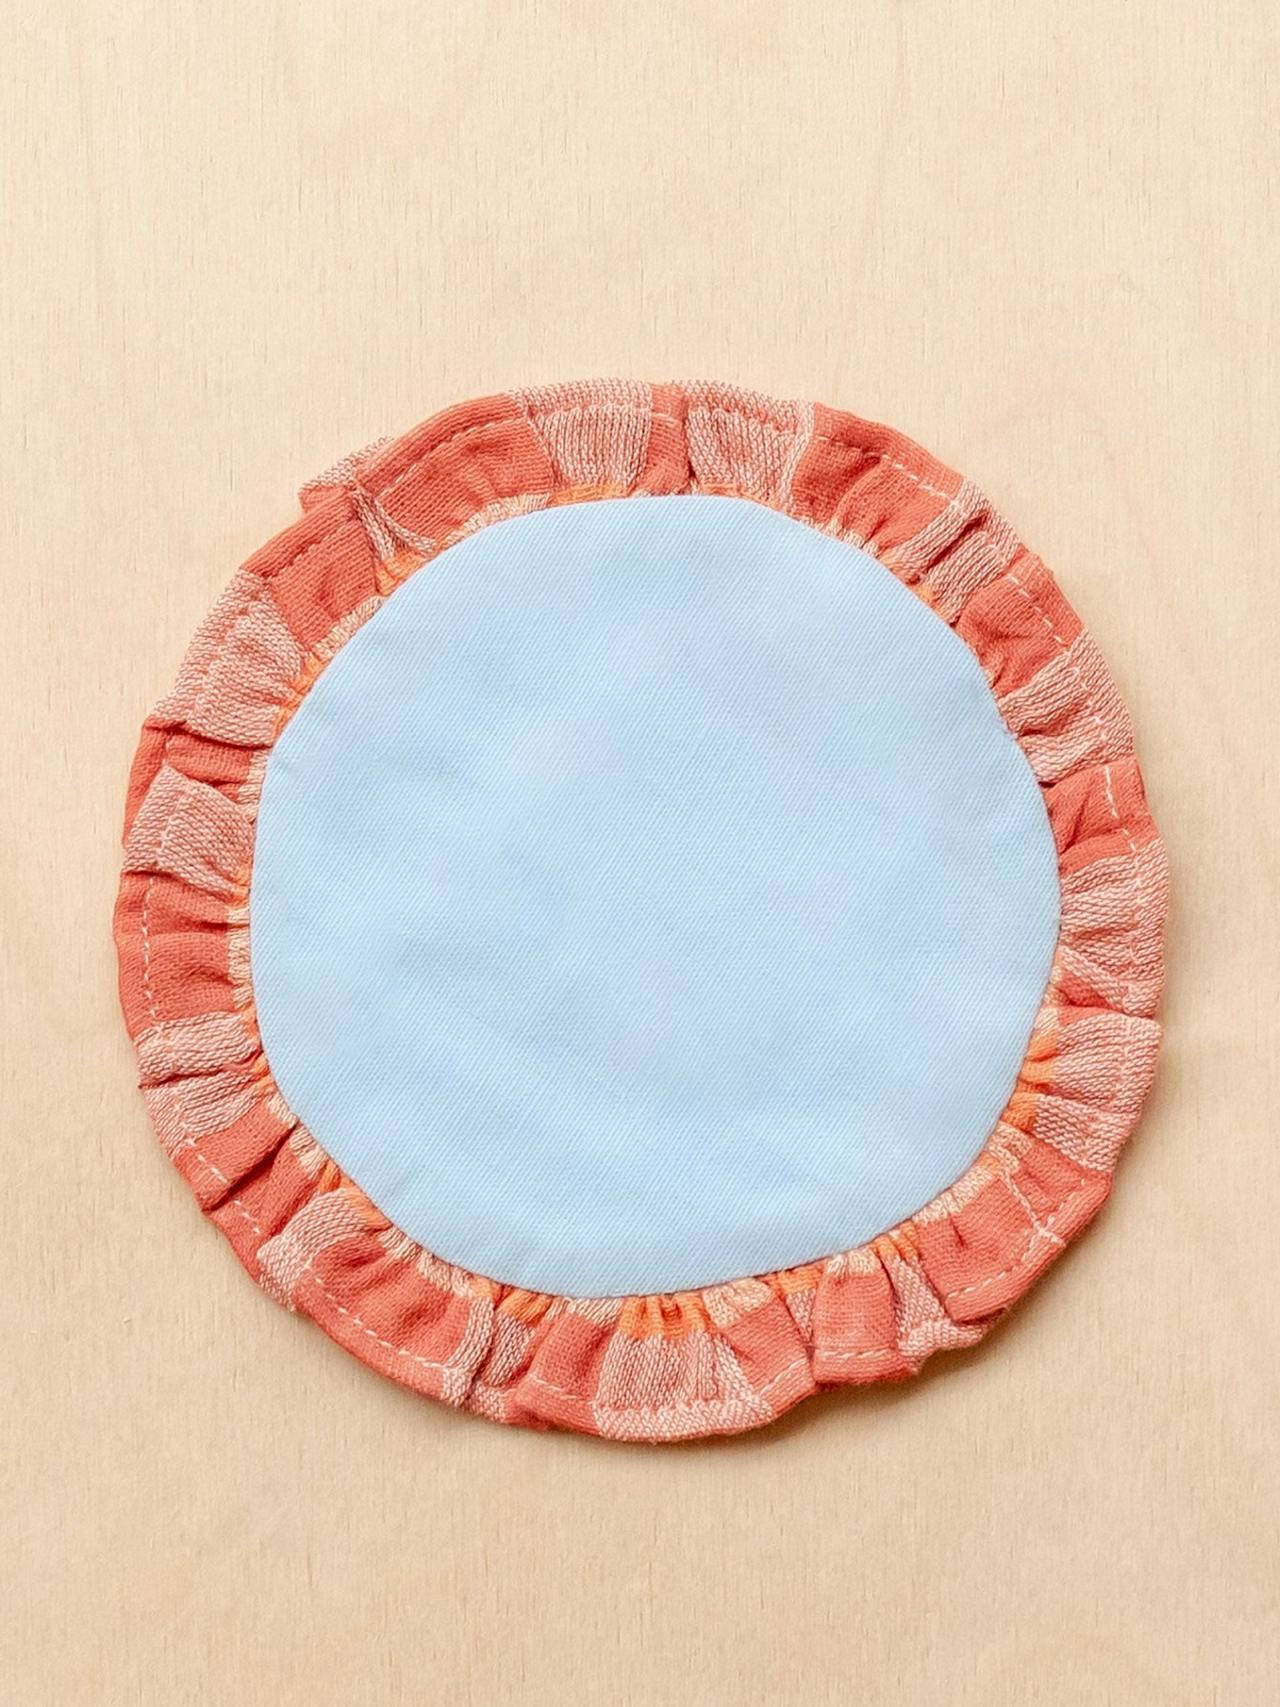 Cotton coasters in blue and apricot, set of 2